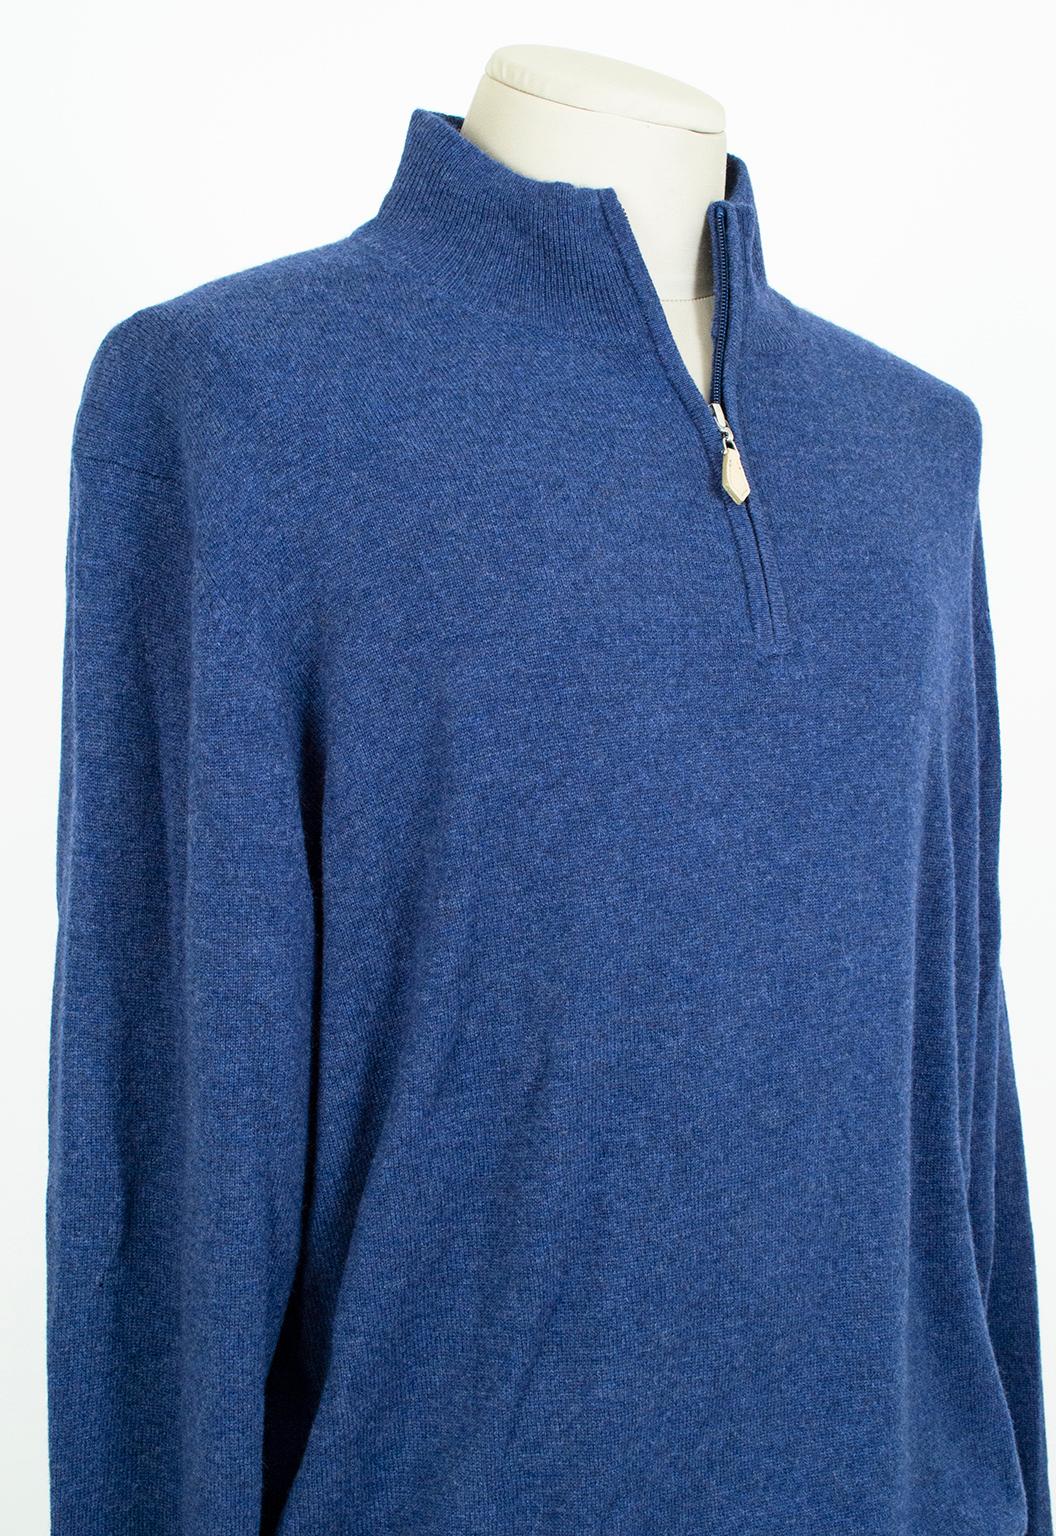 New *Large Size* Men’s Neiman Marcus Blue Cashmere Half-Zip Sweater – XXL, 2019 In New Condition For Sale In Tucson, AZ